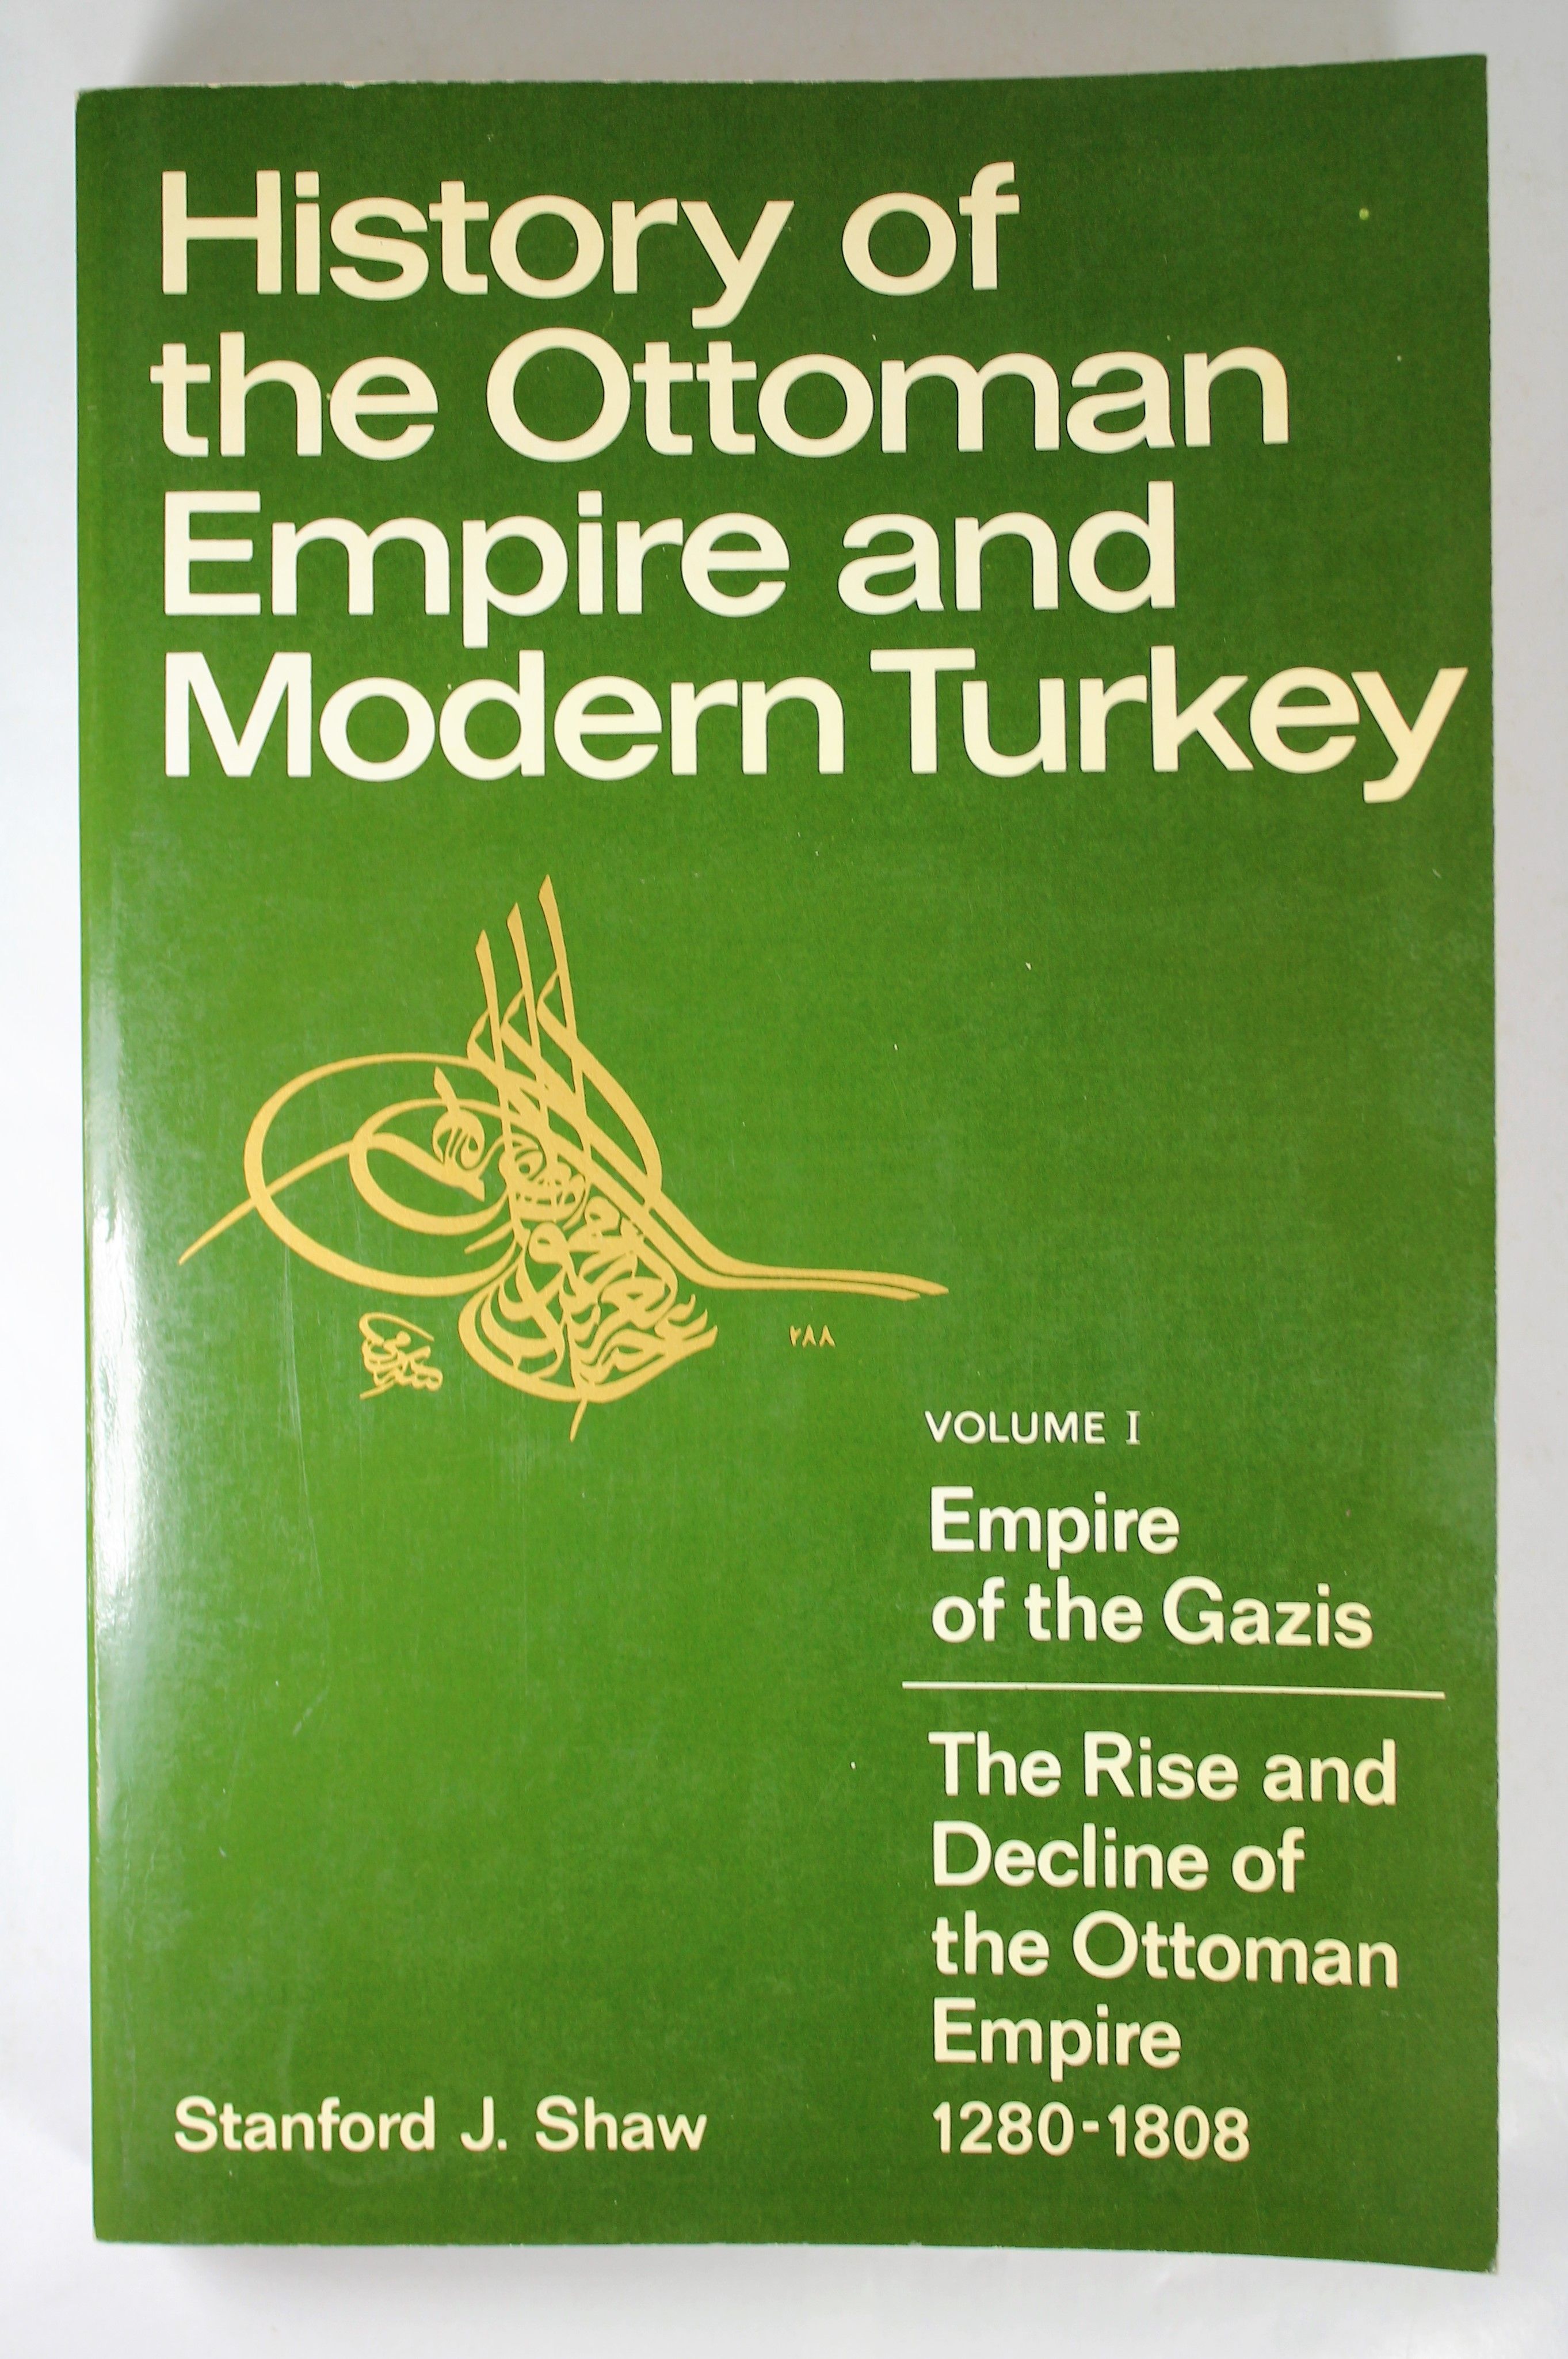 History of the Ottoman Empire and Modern Turkey by Stanford J